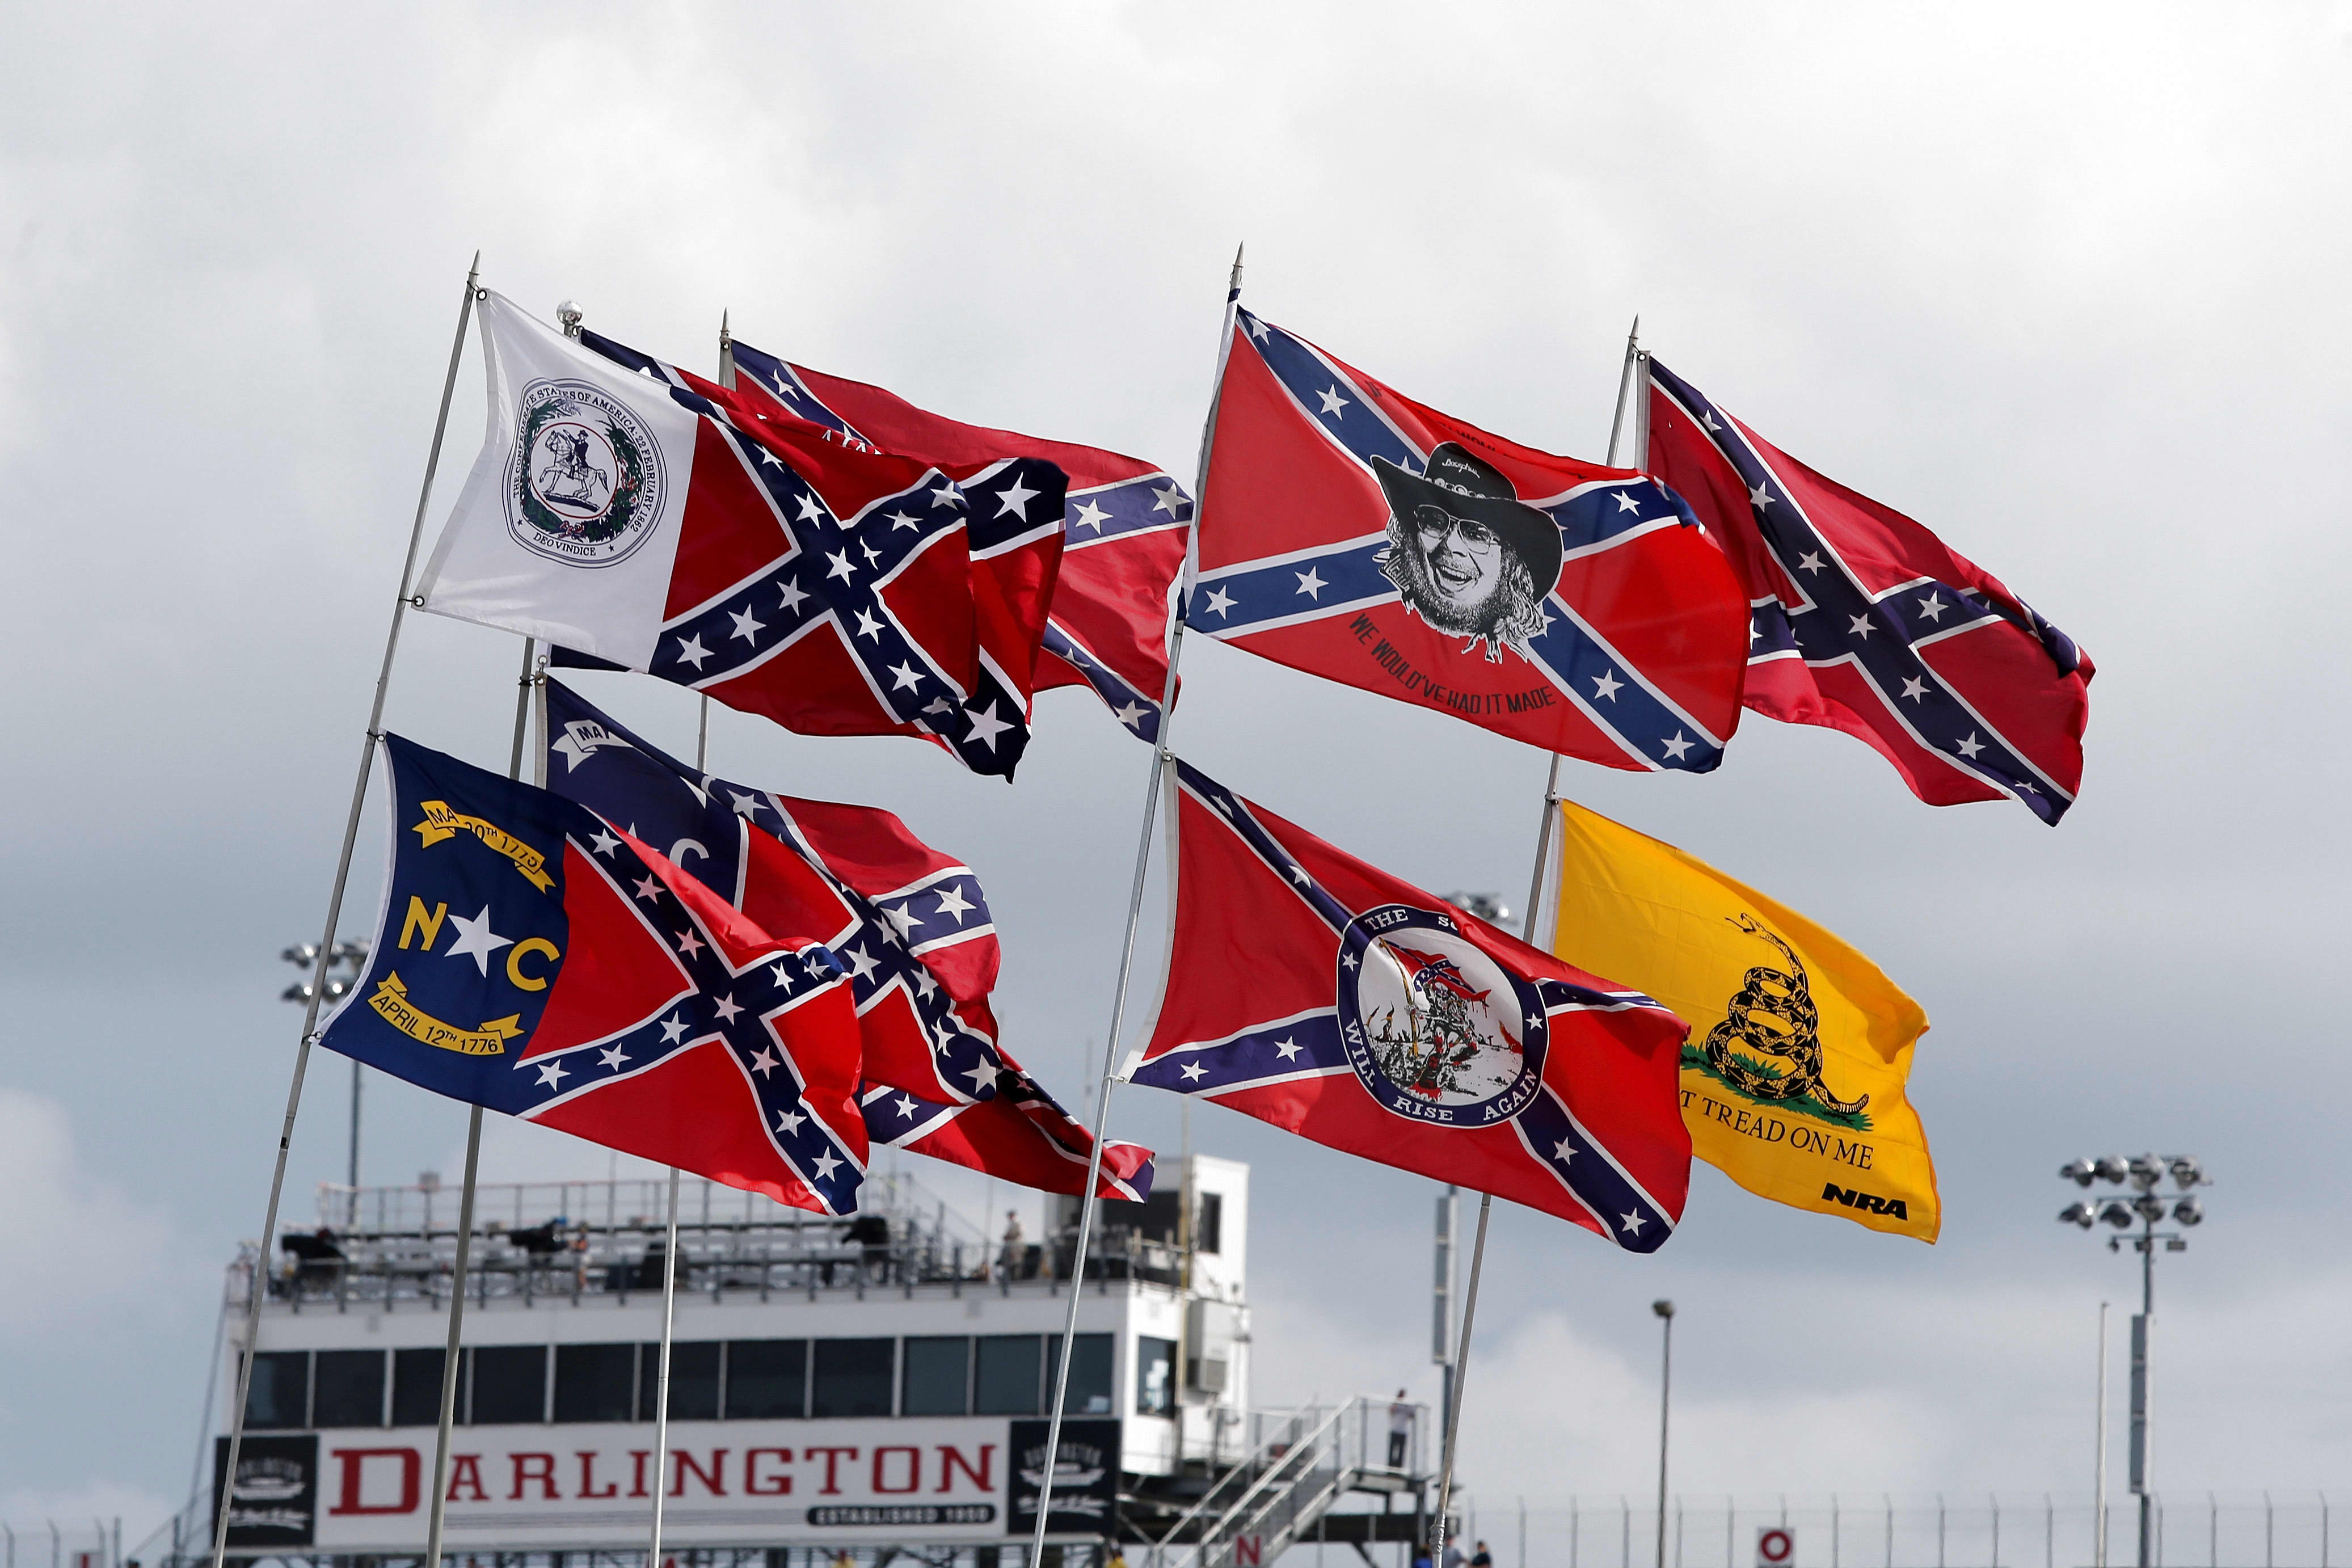 NASCAR nixes idea for General Lee car because of Confederate flag on roof